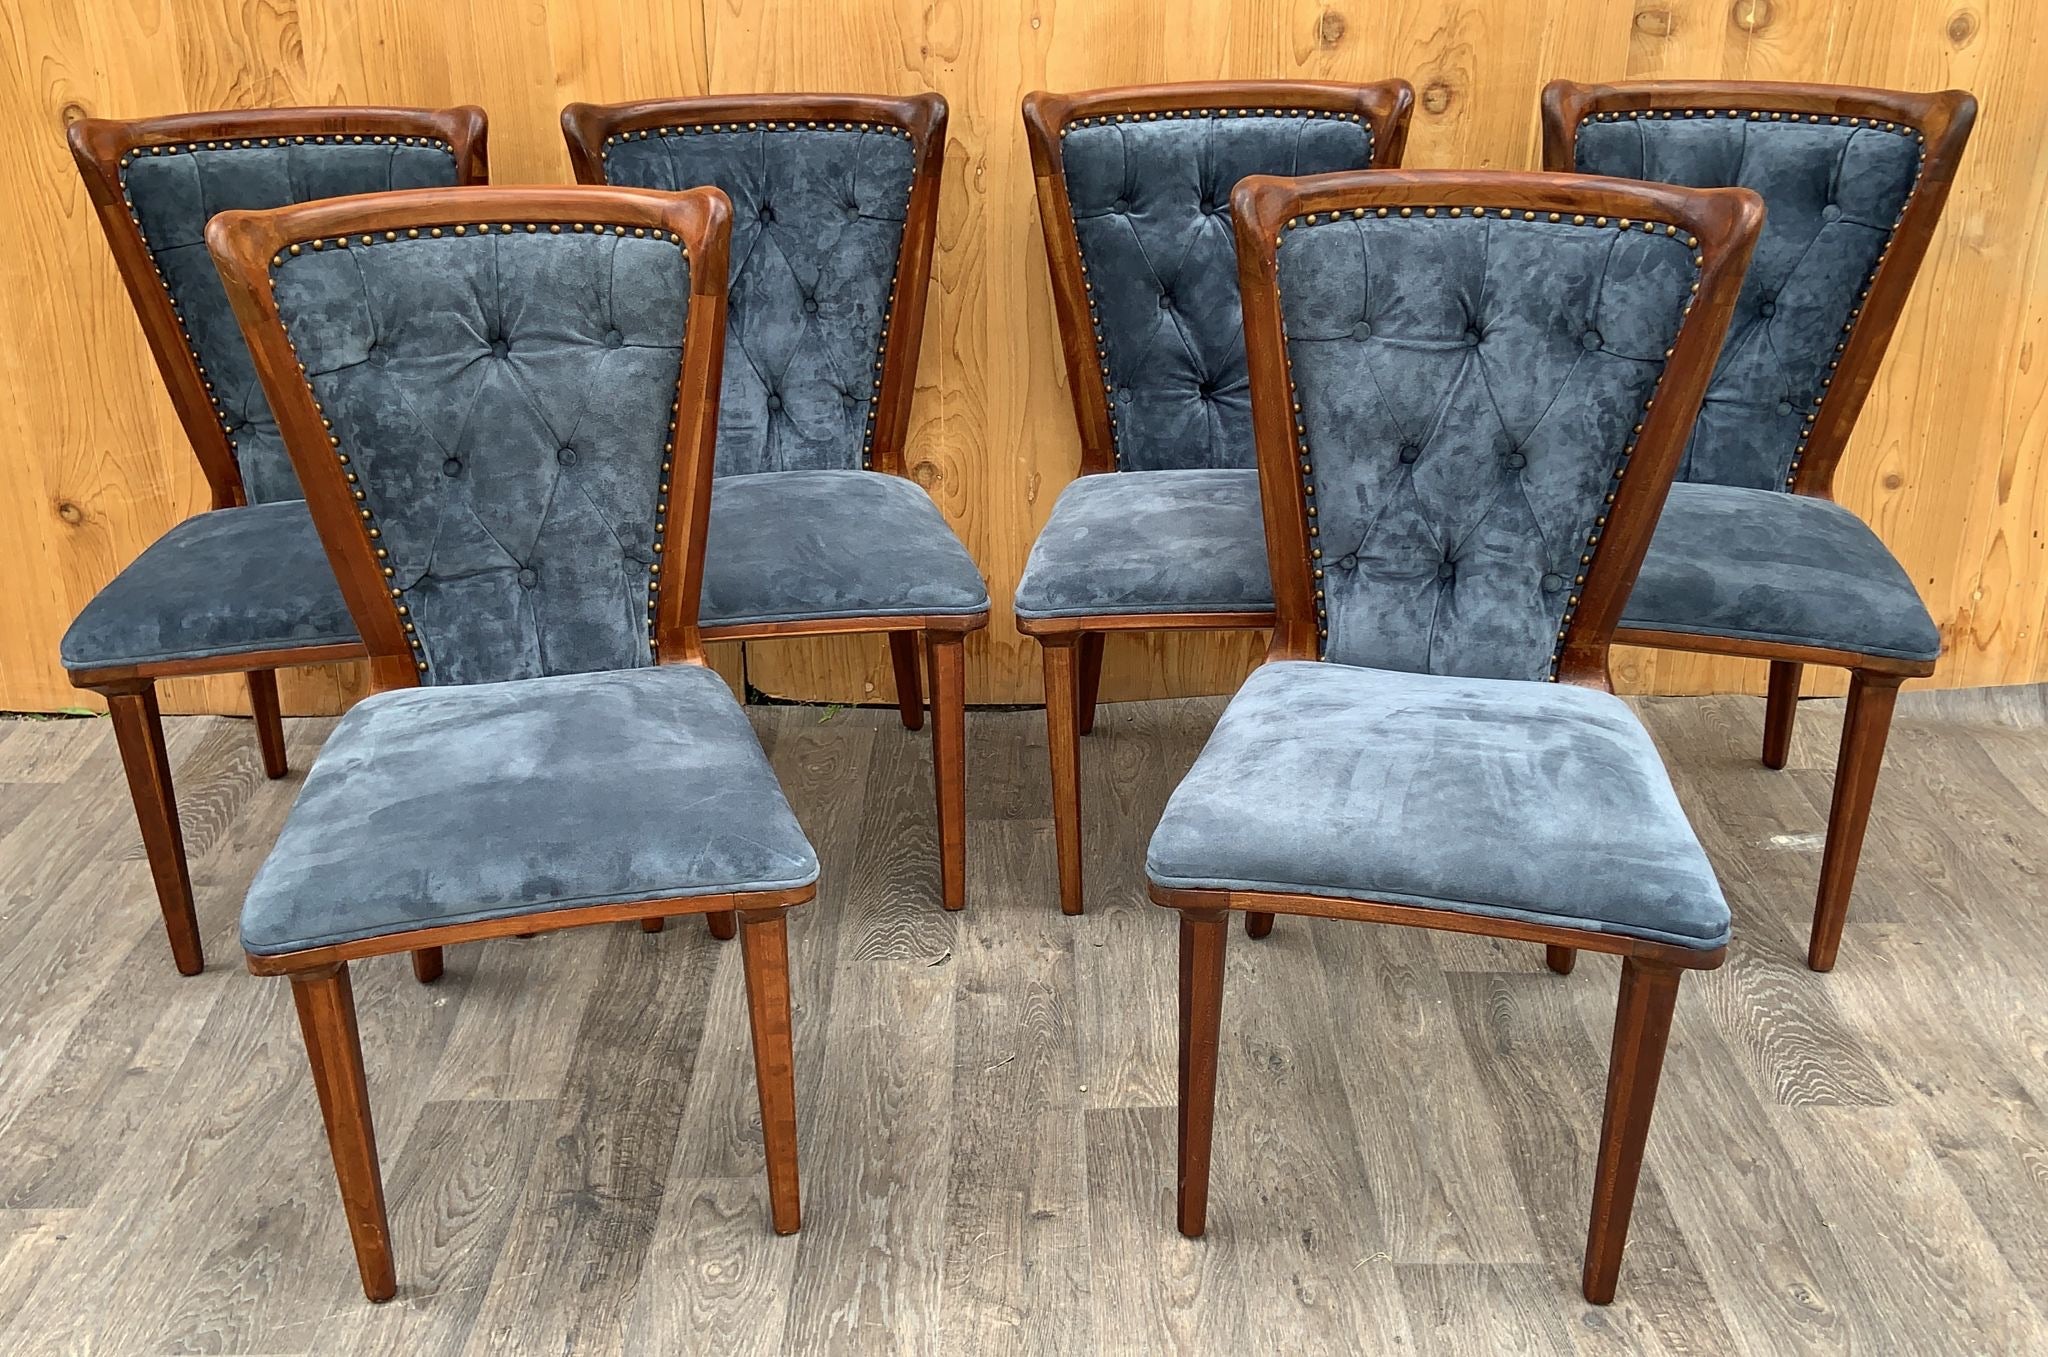 Vintage Italian Art Deco Sculptural Curved Back Dining Chairs Newly Upholstered in a Holly Hunt Blue Suede - Set of 6